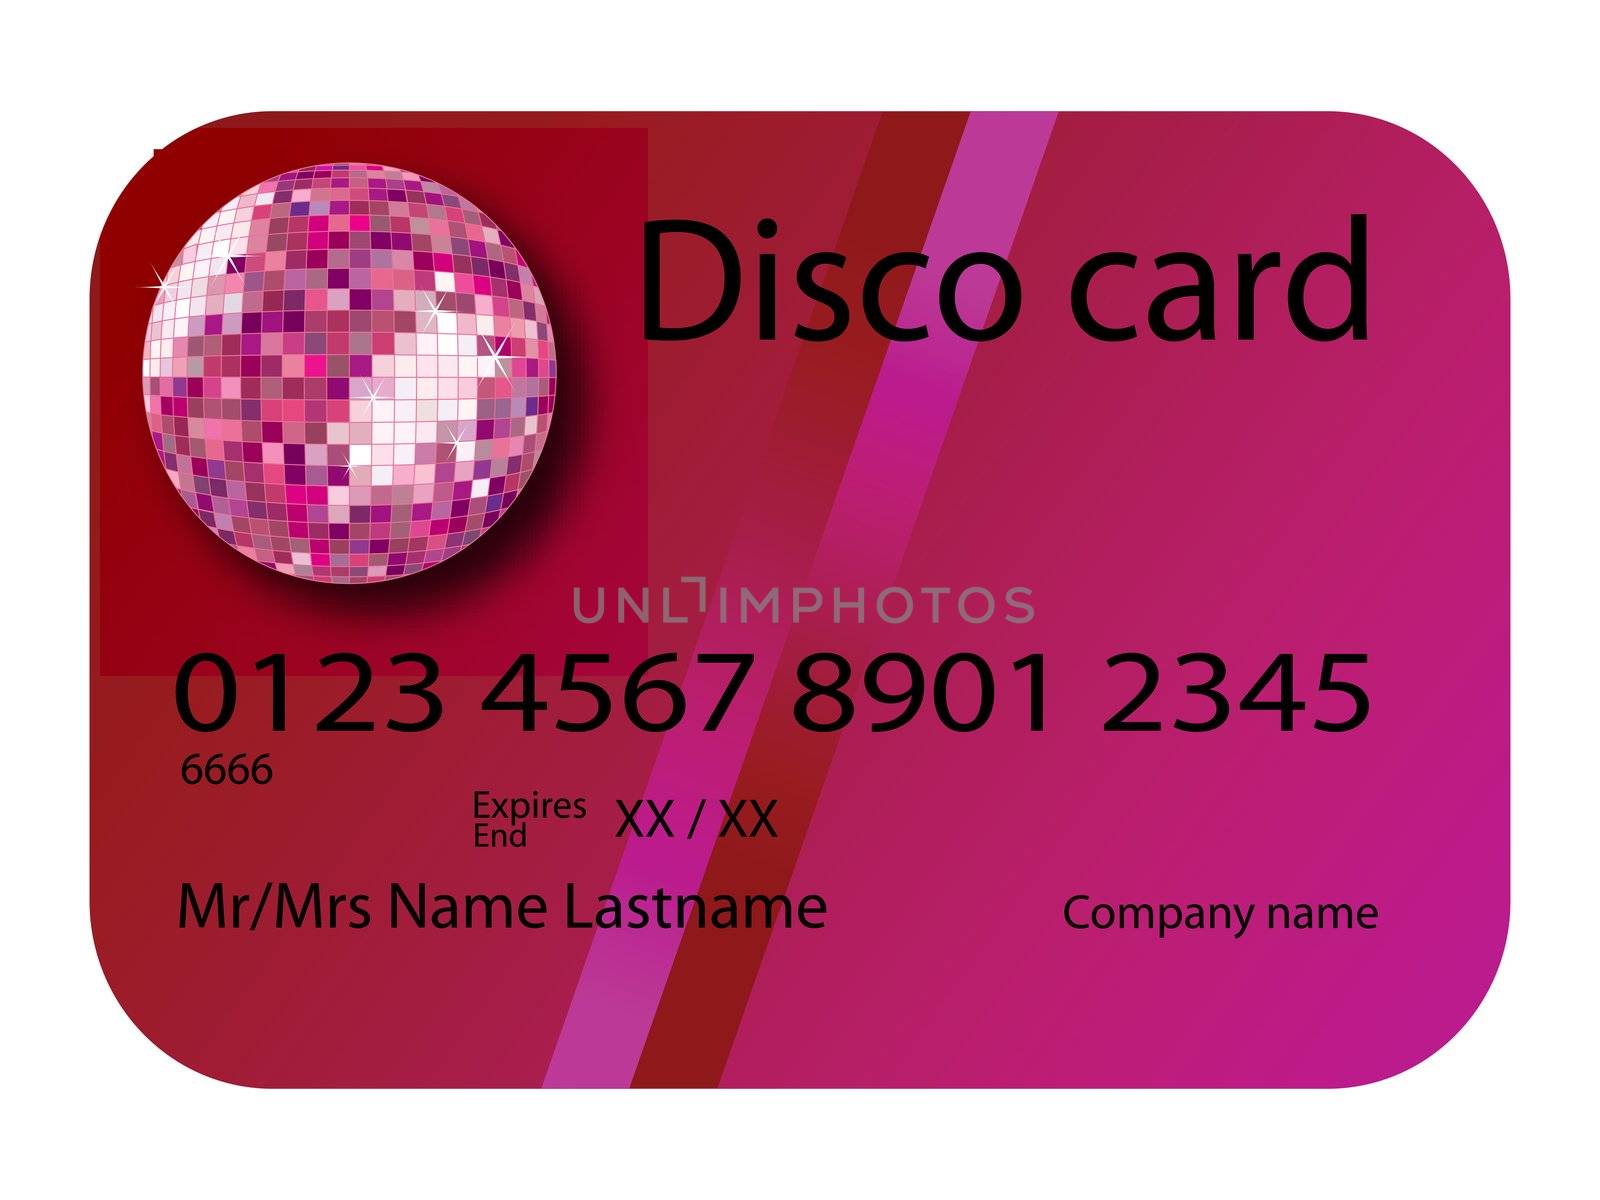 credit card disco purple, vector art illustration; more credit cards in my gallery